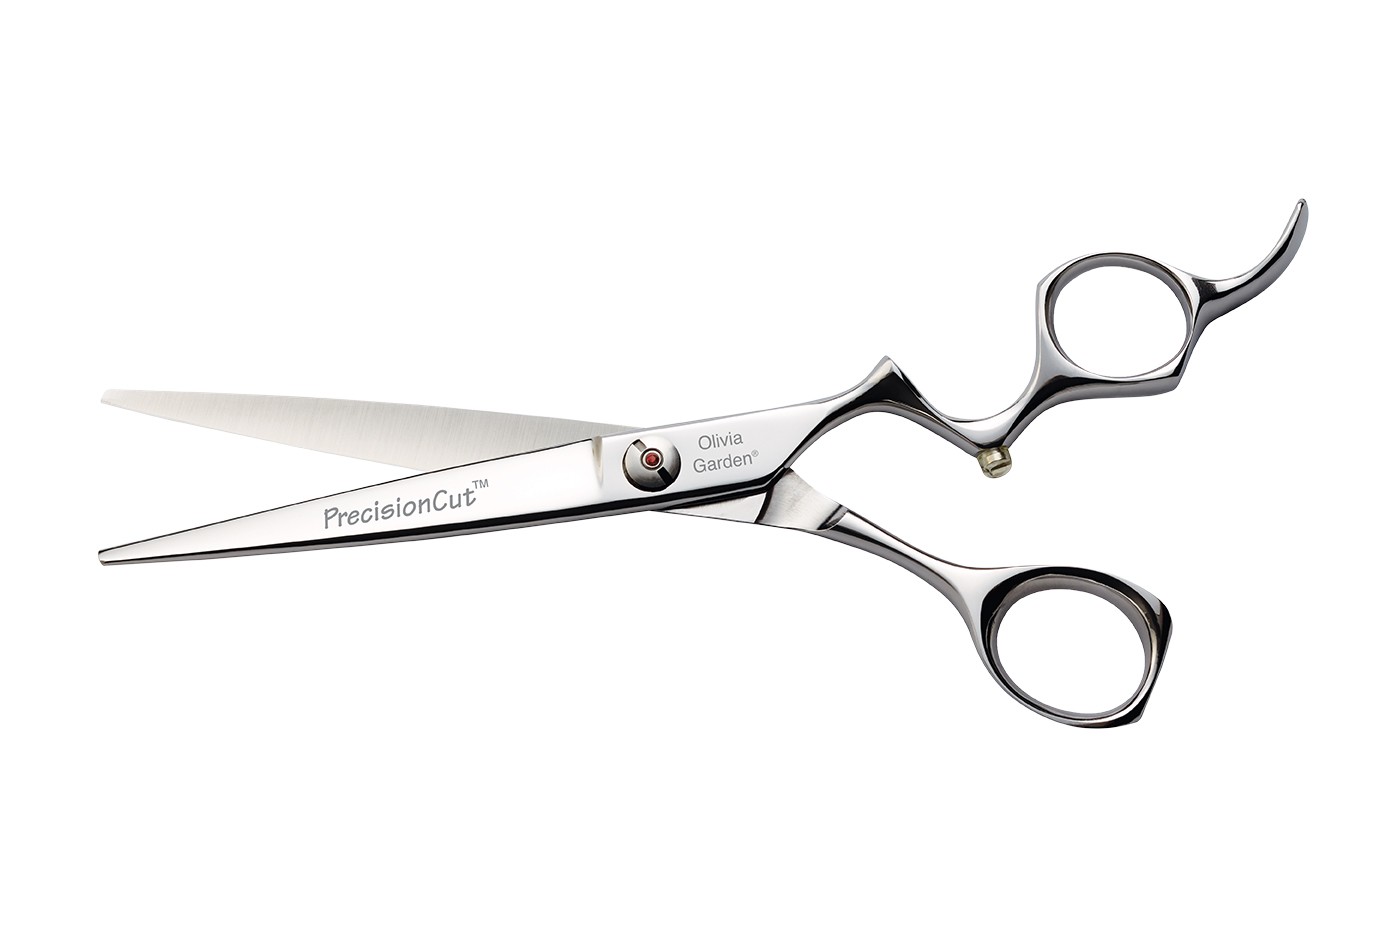 Olivia Garden handcrafted shear for creative haircuts